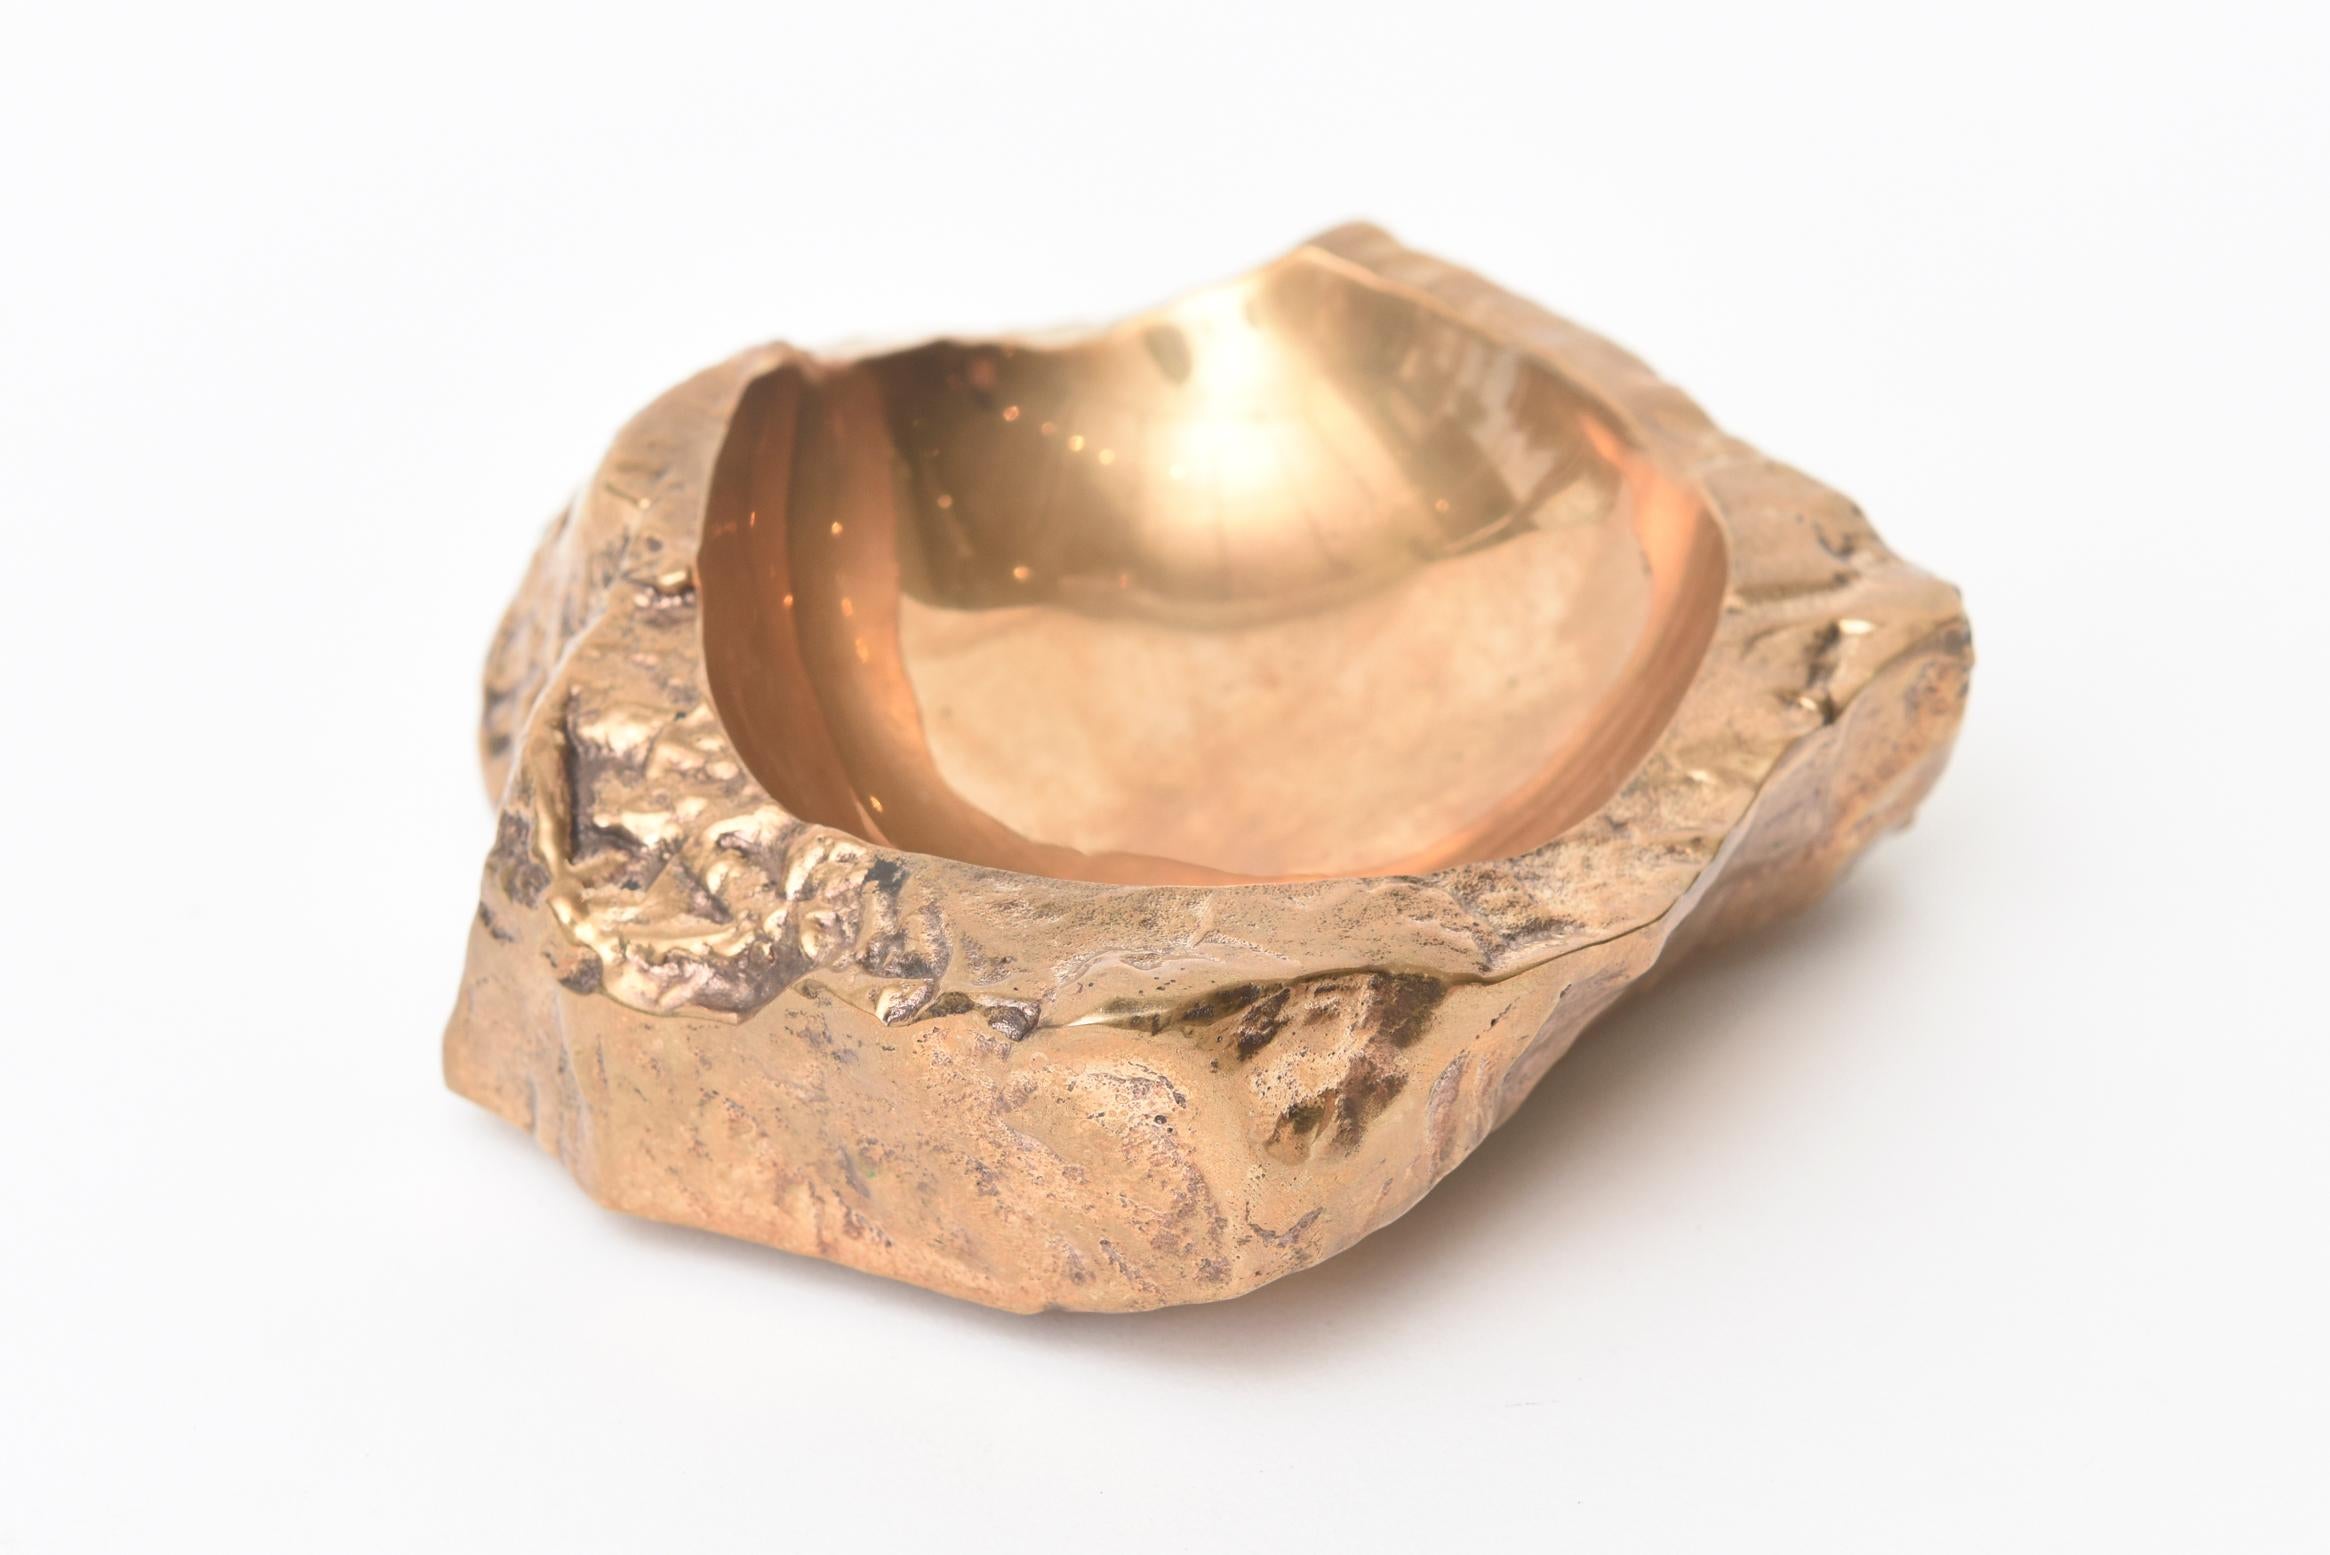 This chunky and heavy French gilt bronze vida poche bowl is like an organic nugget. It makes a great desk accessory or console or cocktail table addition. It is sculpture in the way of a bowl that has been gilded over the bronze. It is from the